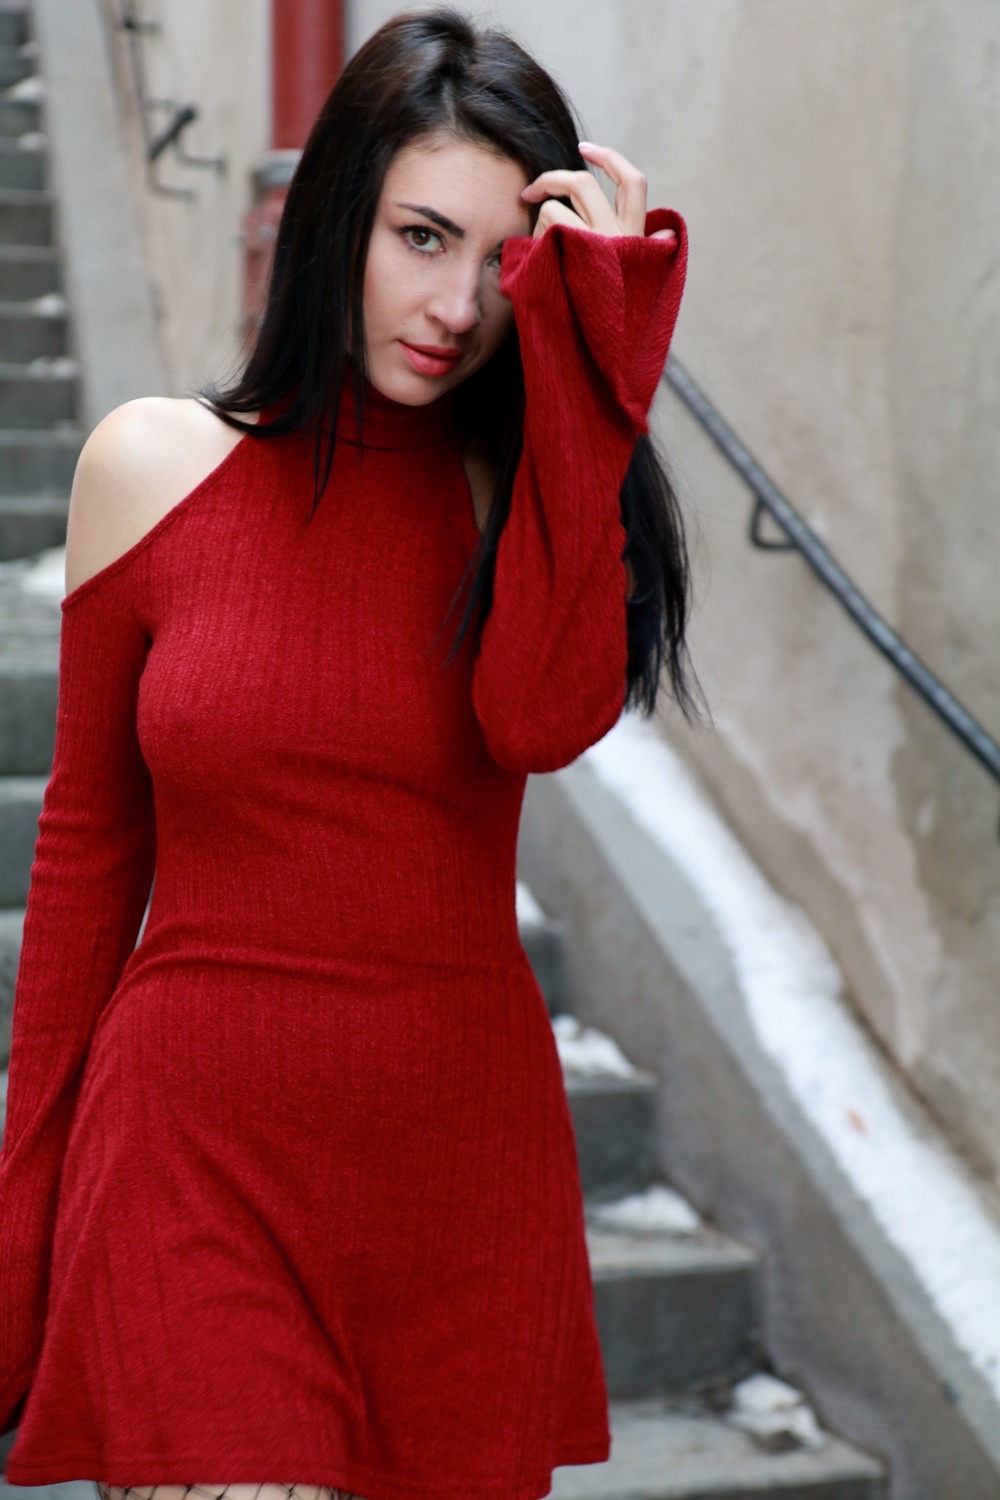 The Red Dress Effect 9